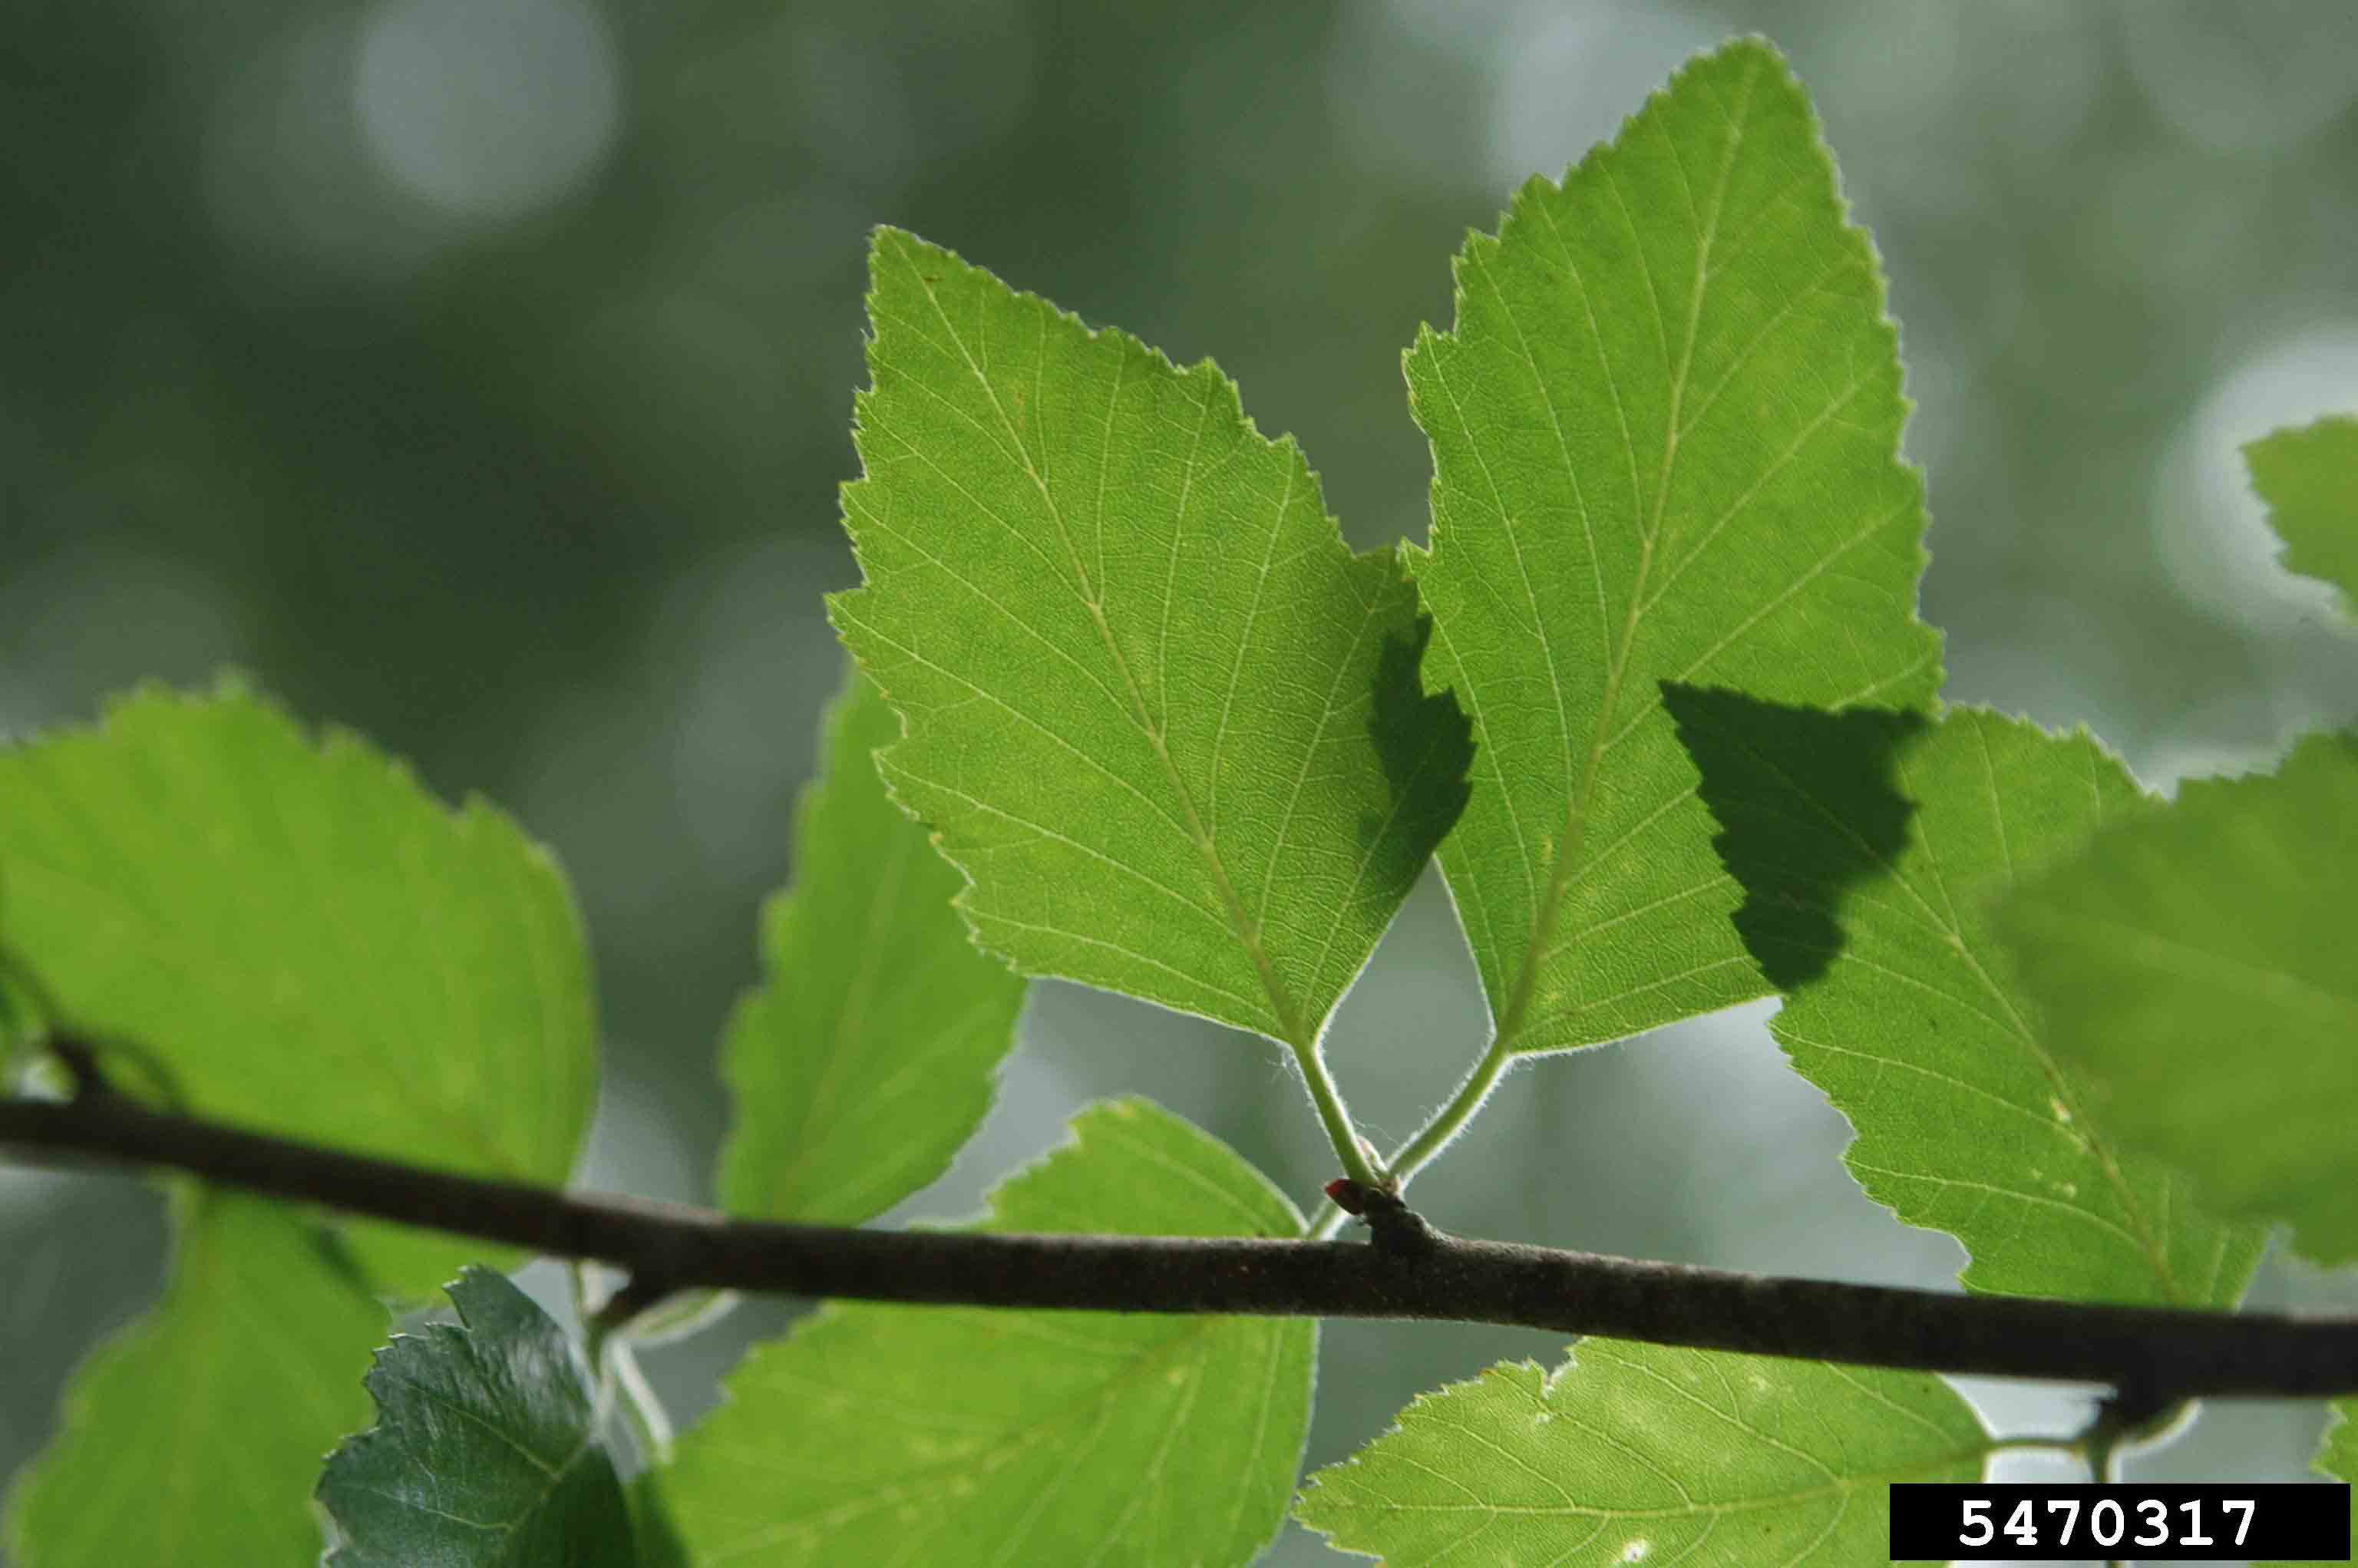 River birch leaves, showing double-toothed margins